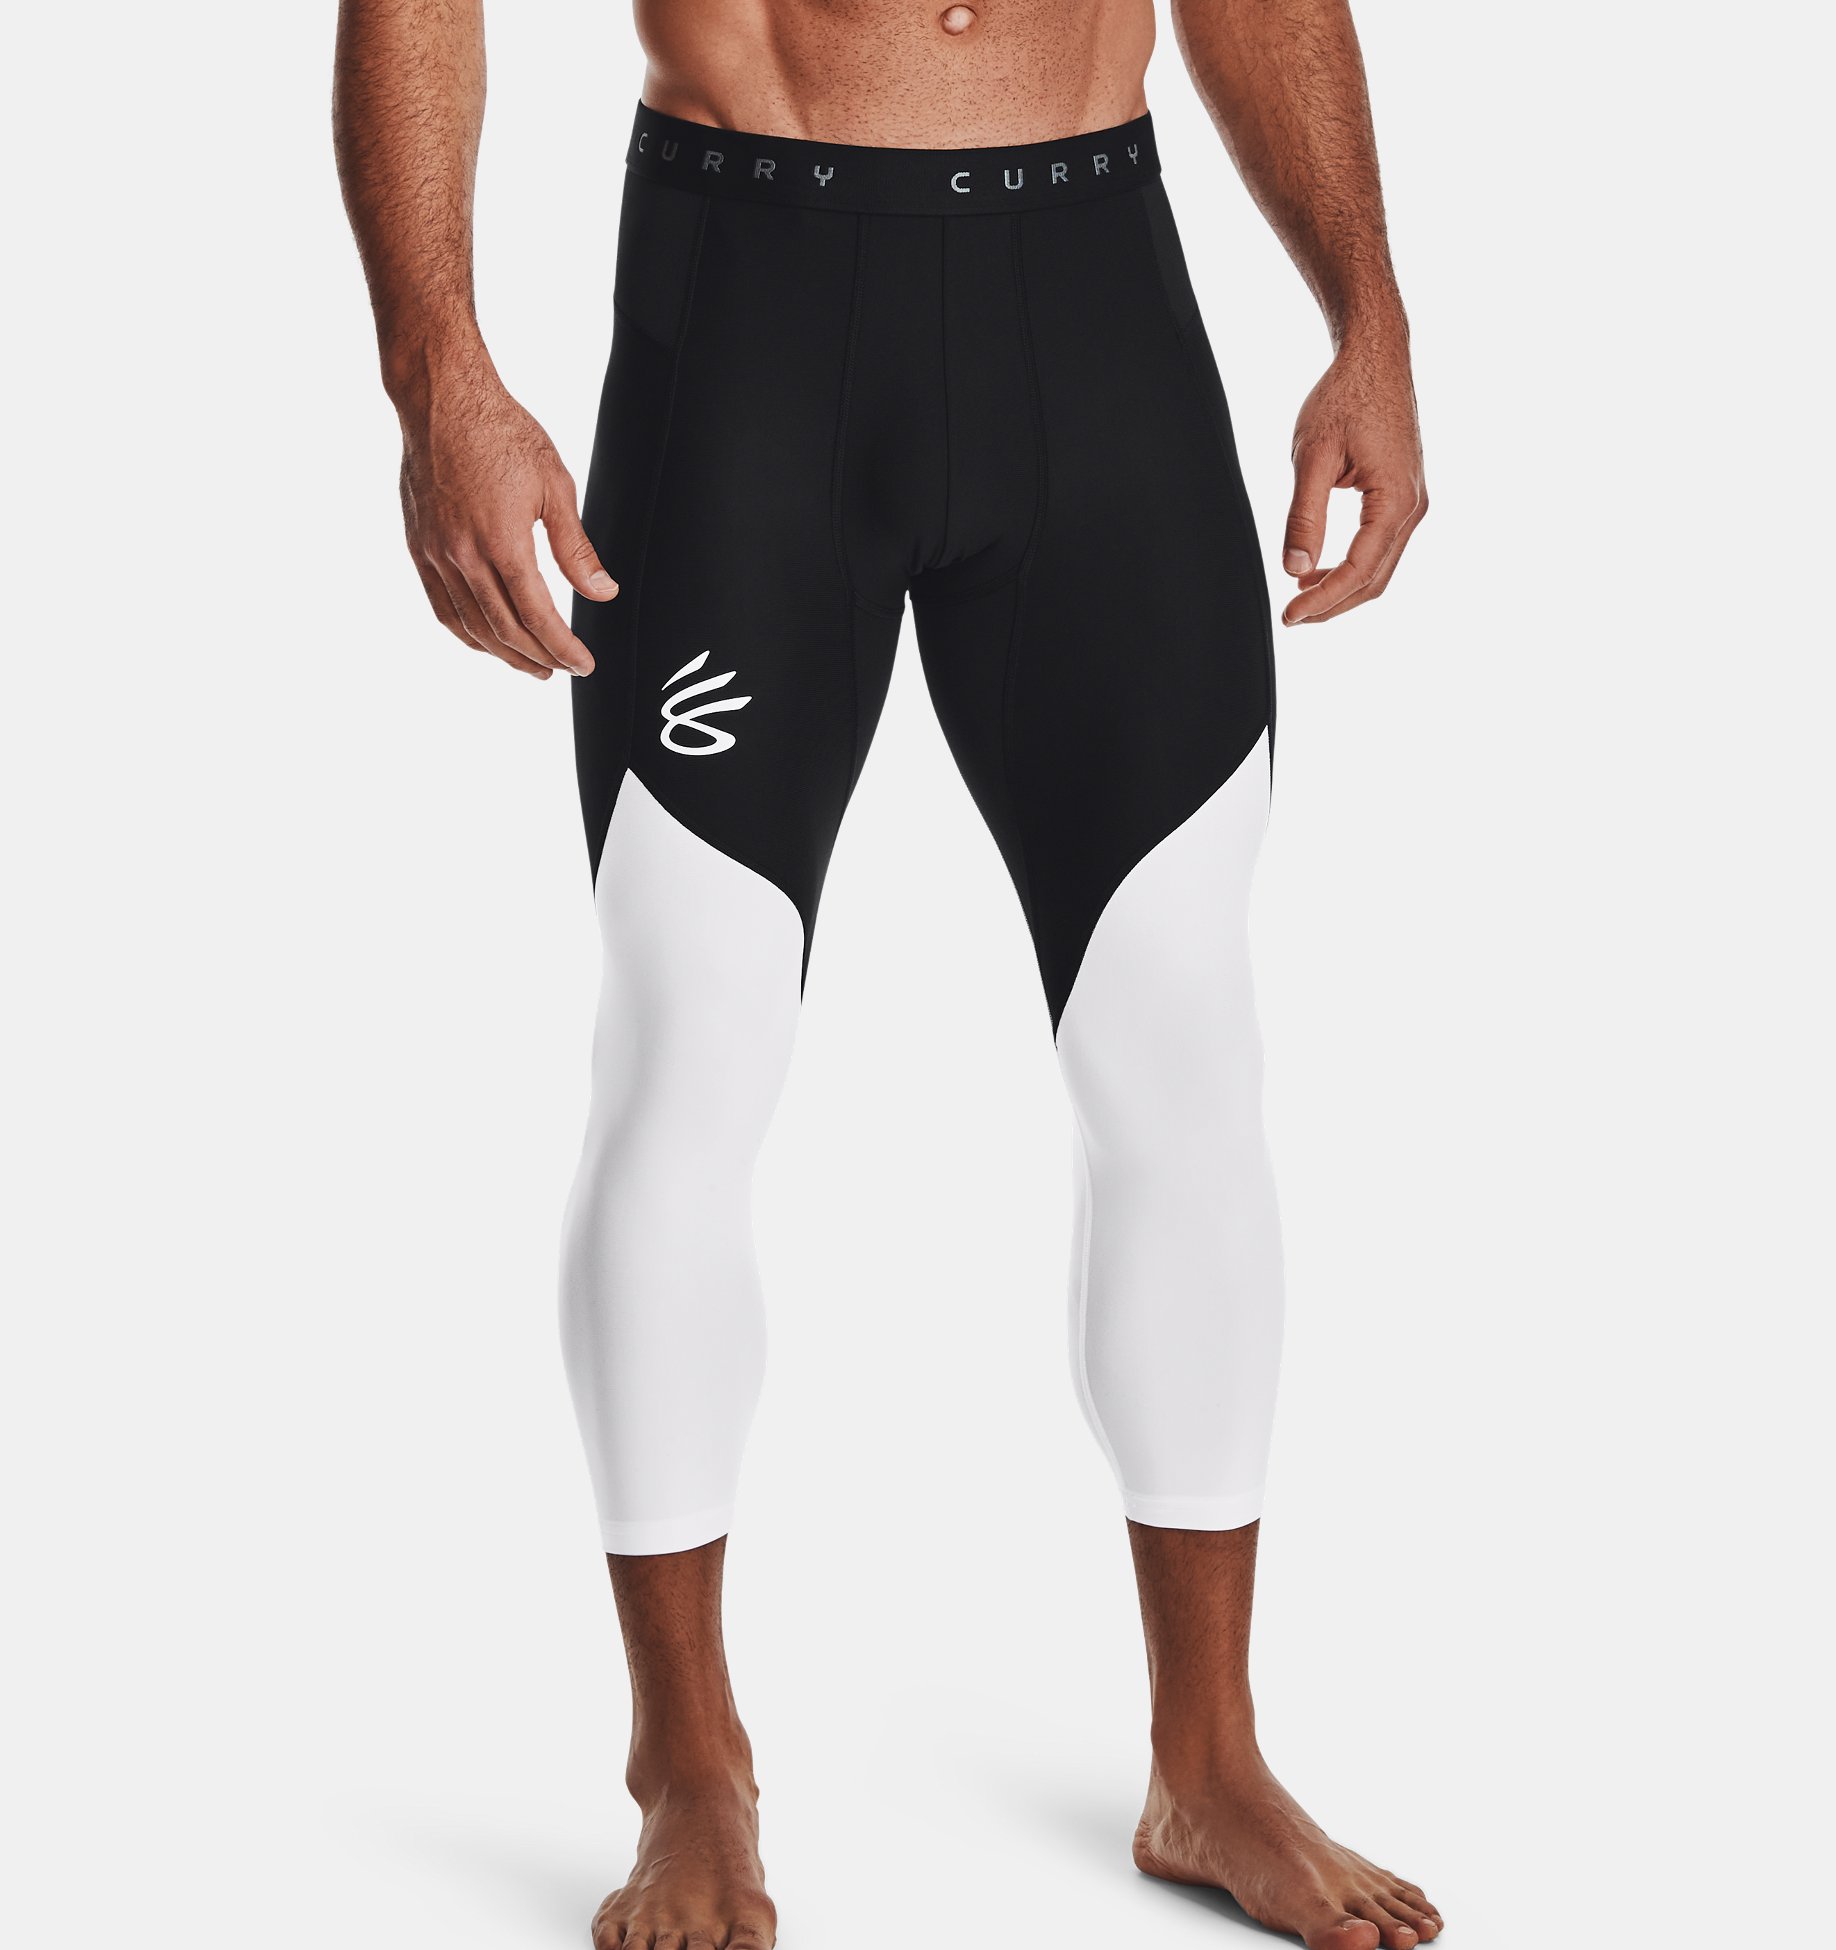 Leggings Hombre Under Armour Curry Seamless Knee 